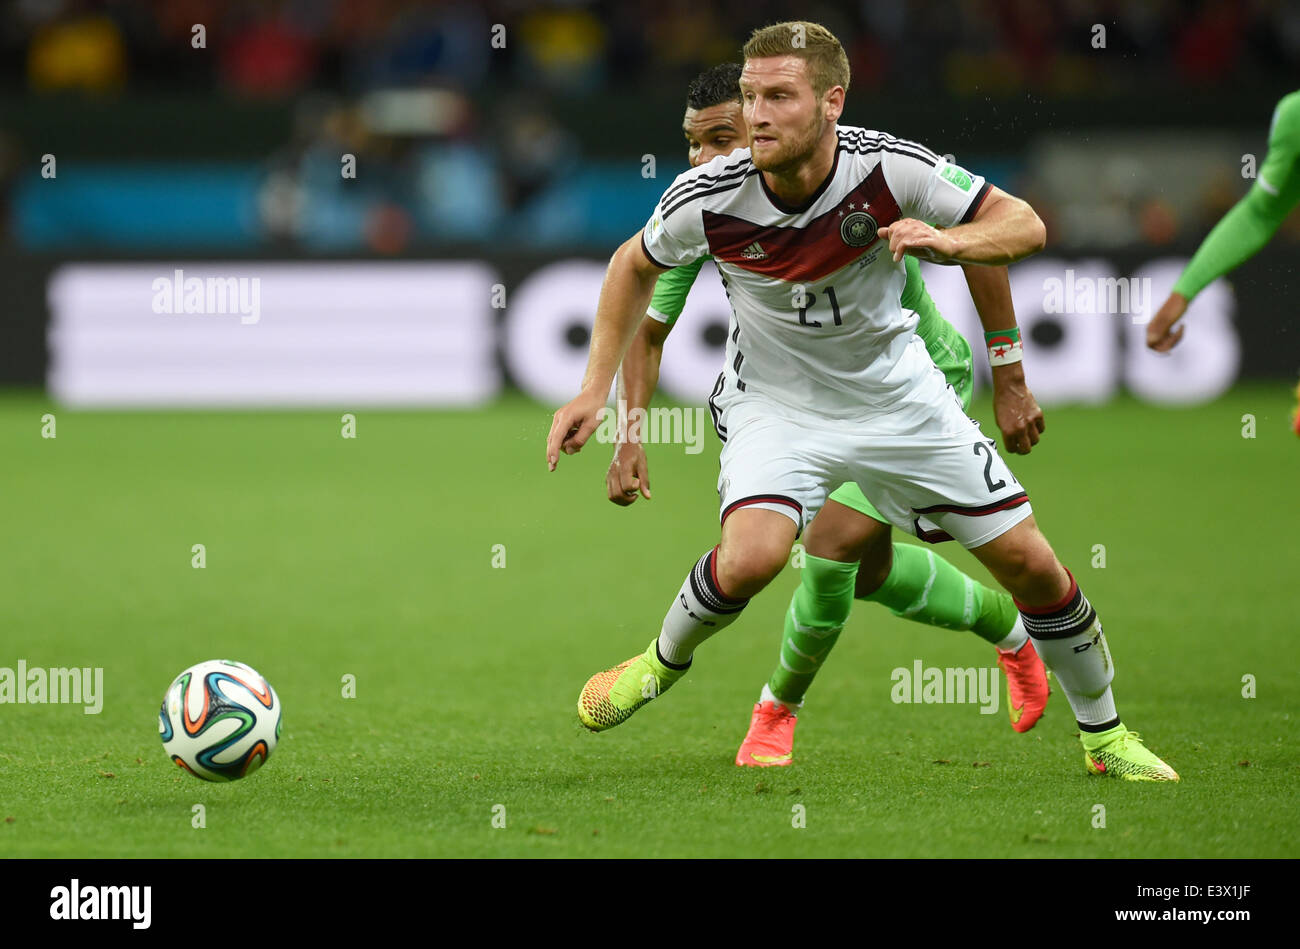 Porto Alegre, Brazil. 30th June, 2014. Germany's Shkodran Mustafi in action during the FIFA World Cup 2014 round of 16 soccer match between Germany and Algeria at the Estadio Beira-Rio in Porto Alegre, Brazil, 30 June 2014. Photo: Andreas Gebert/dpa/Alamy Live News Stock Photo